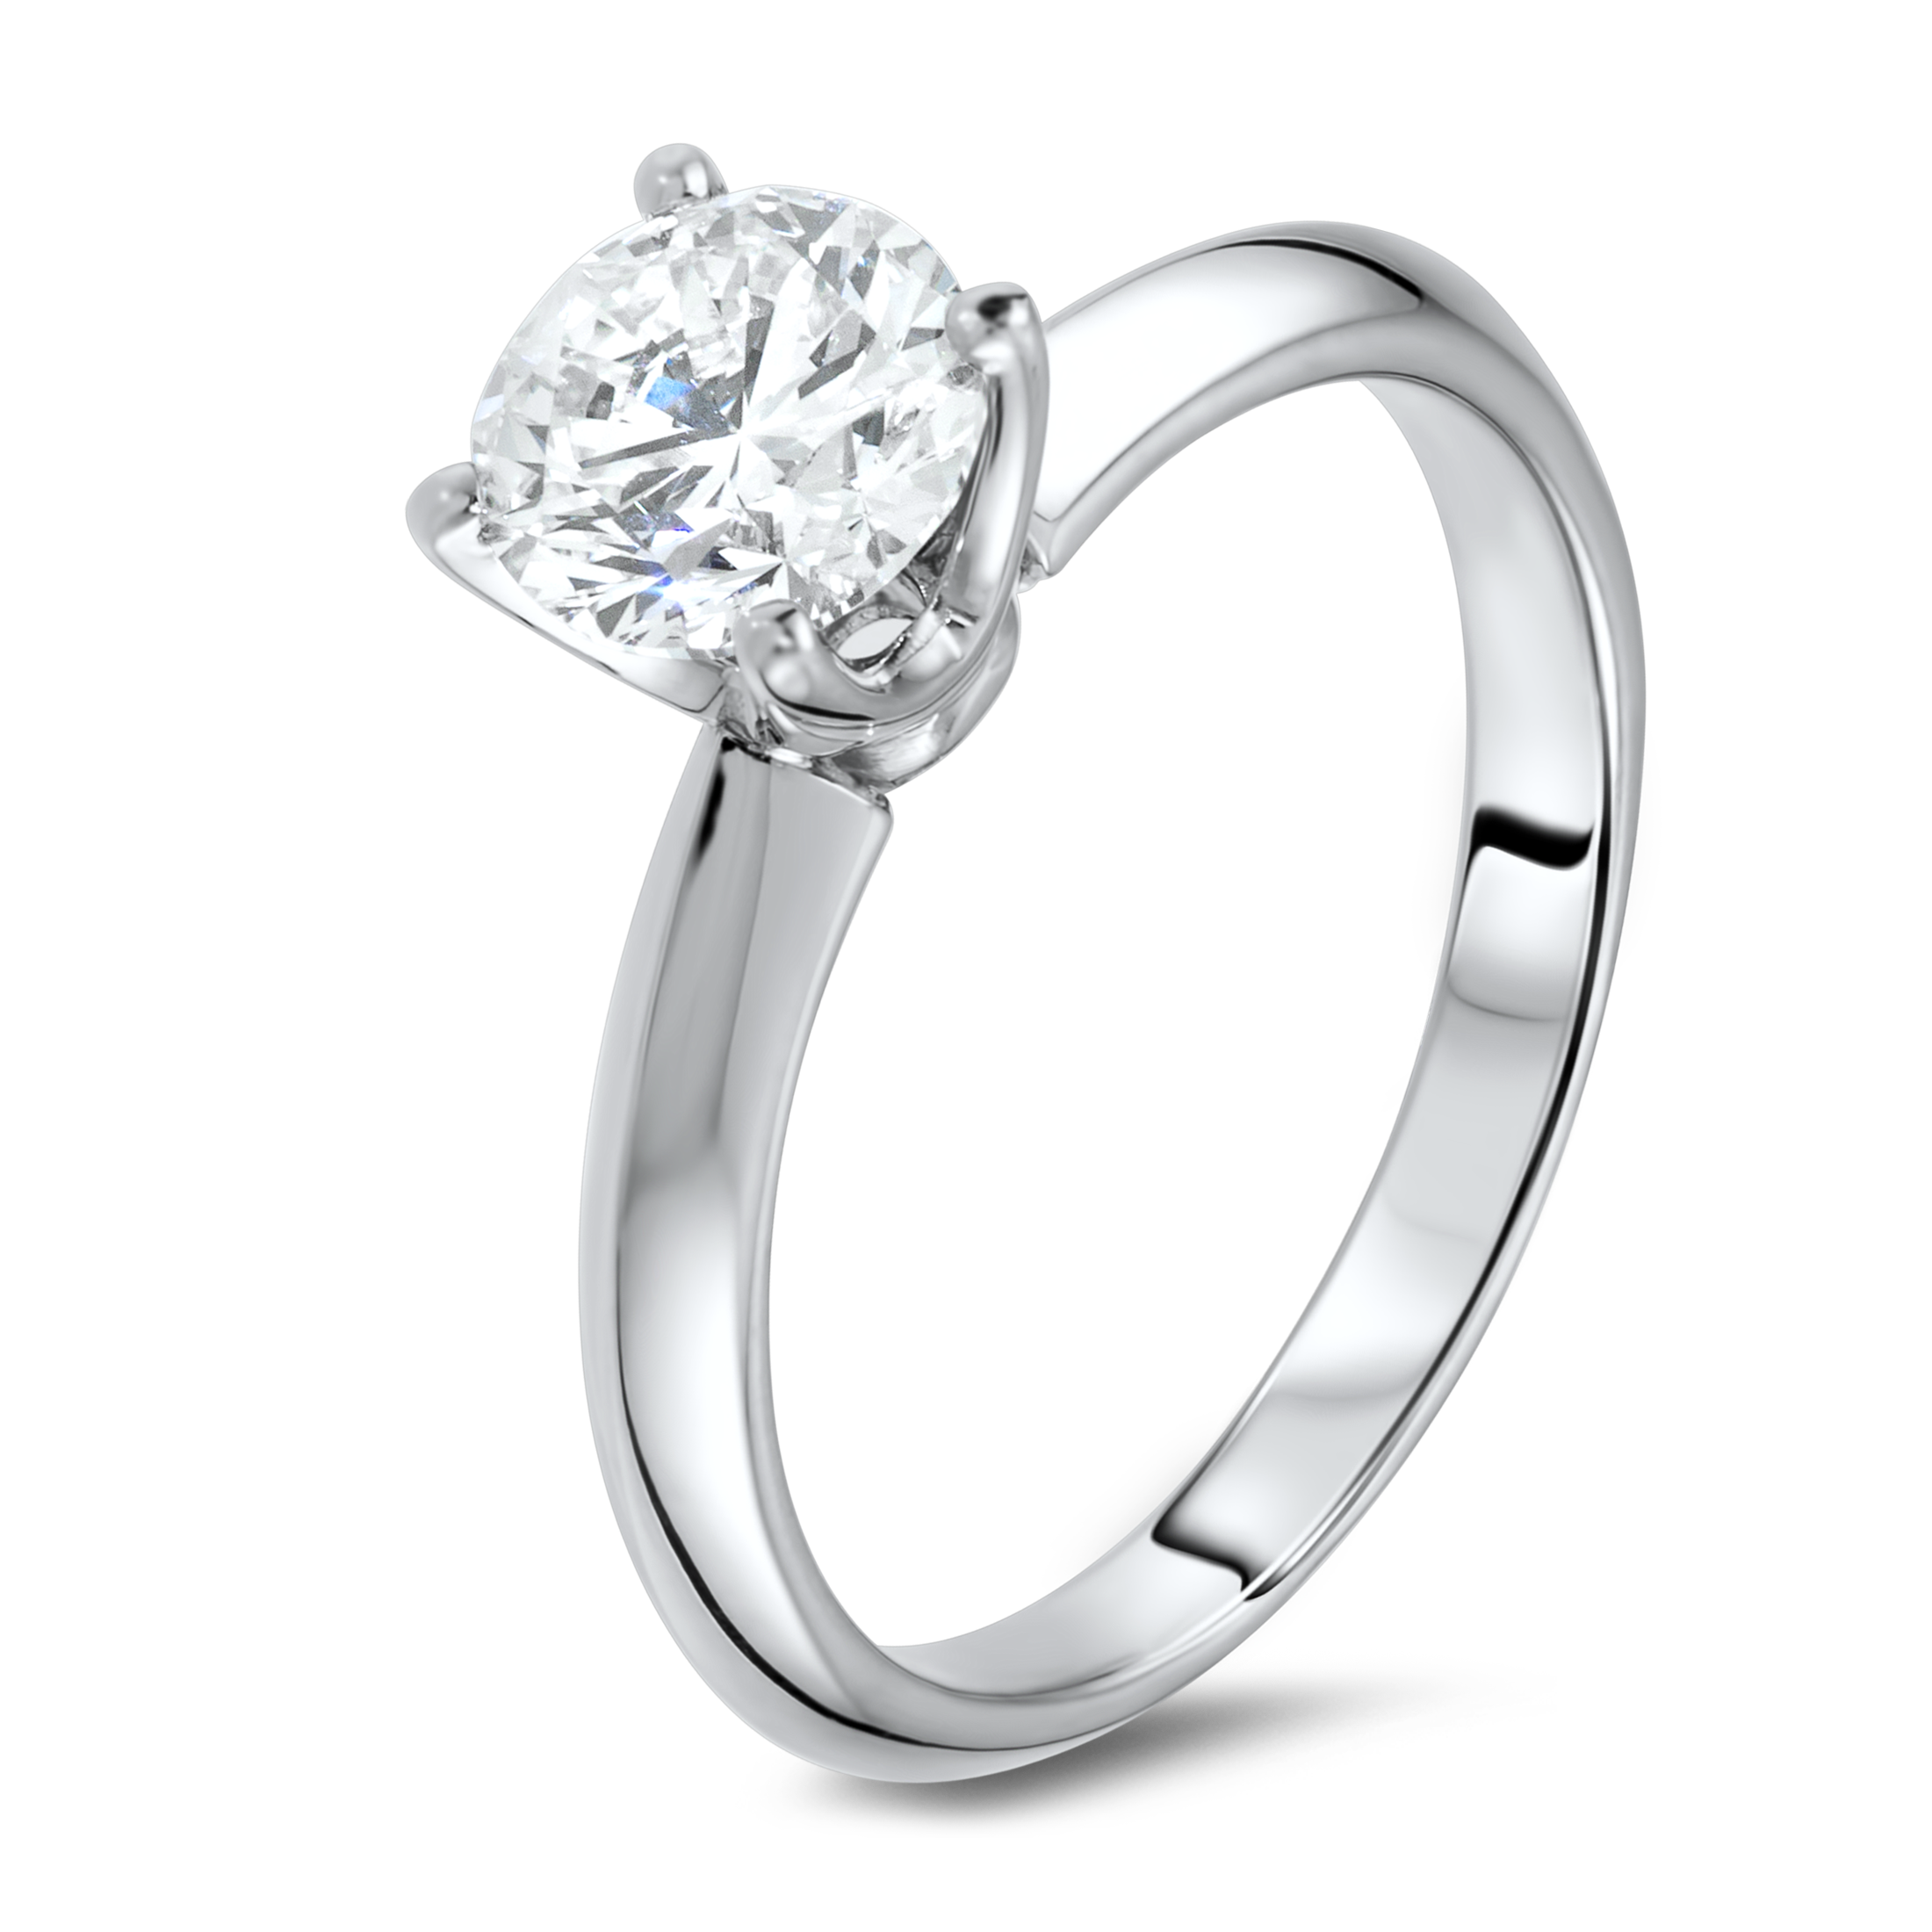 Silver Ring Photos PNG Image